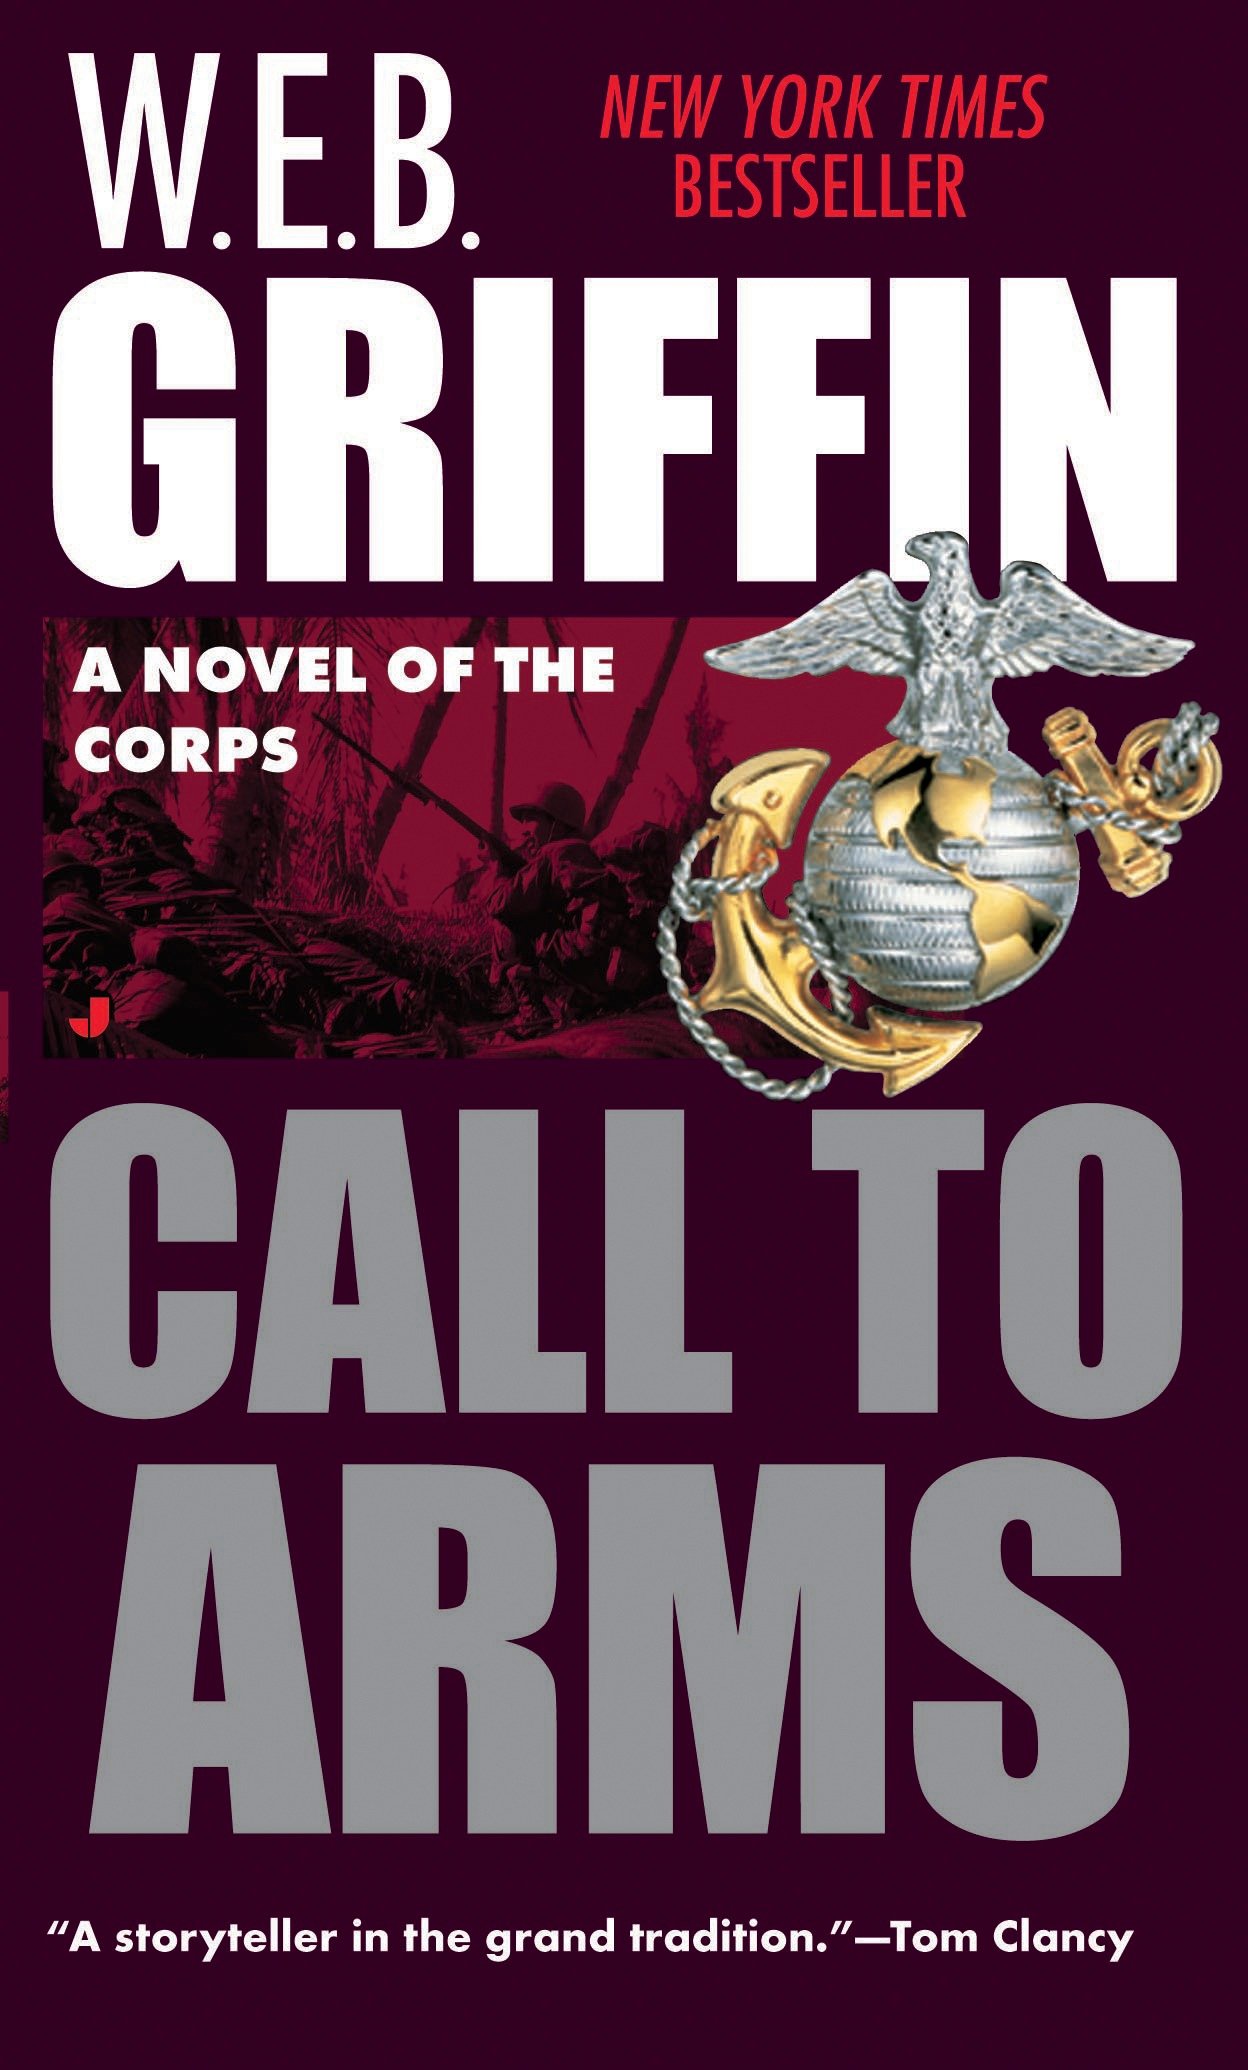 Corps: Call to Arms (Series #2) (Paperback) - image 1 of 1